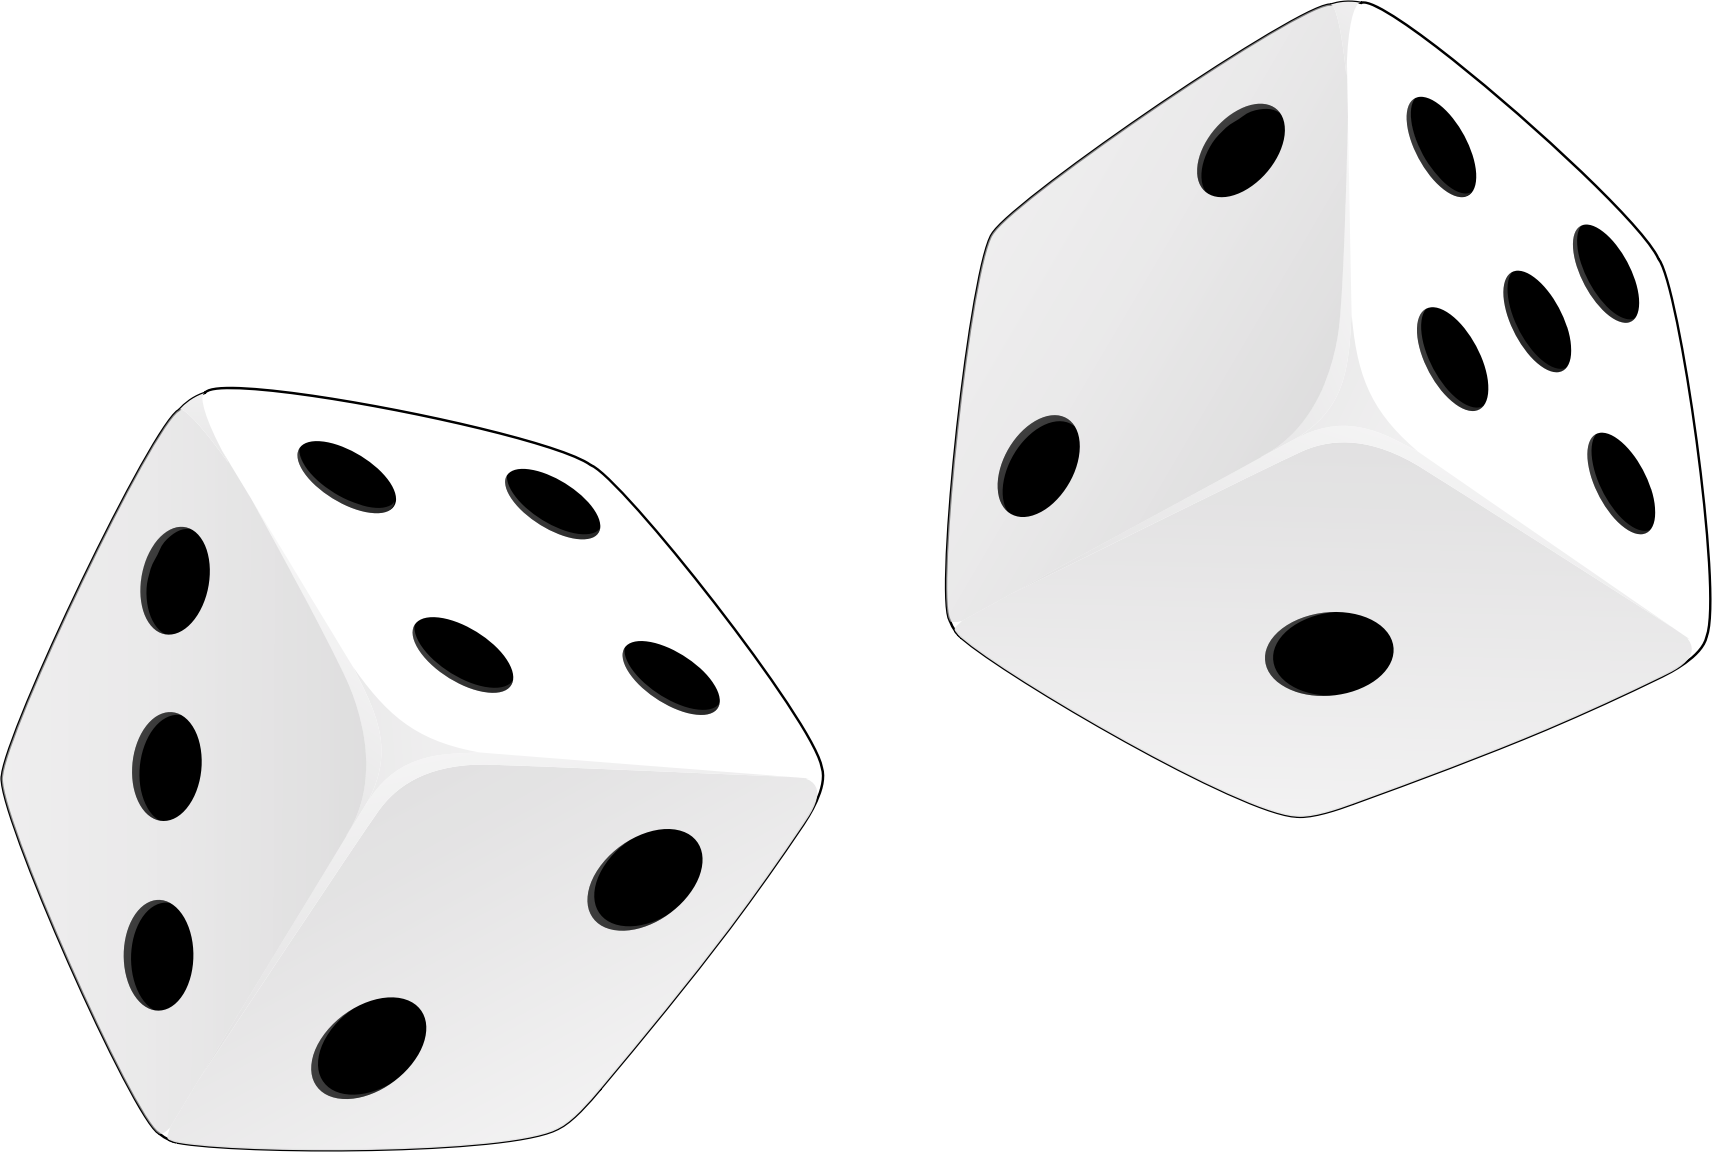 Dice Images Illustrations Photos Image Png Clipart